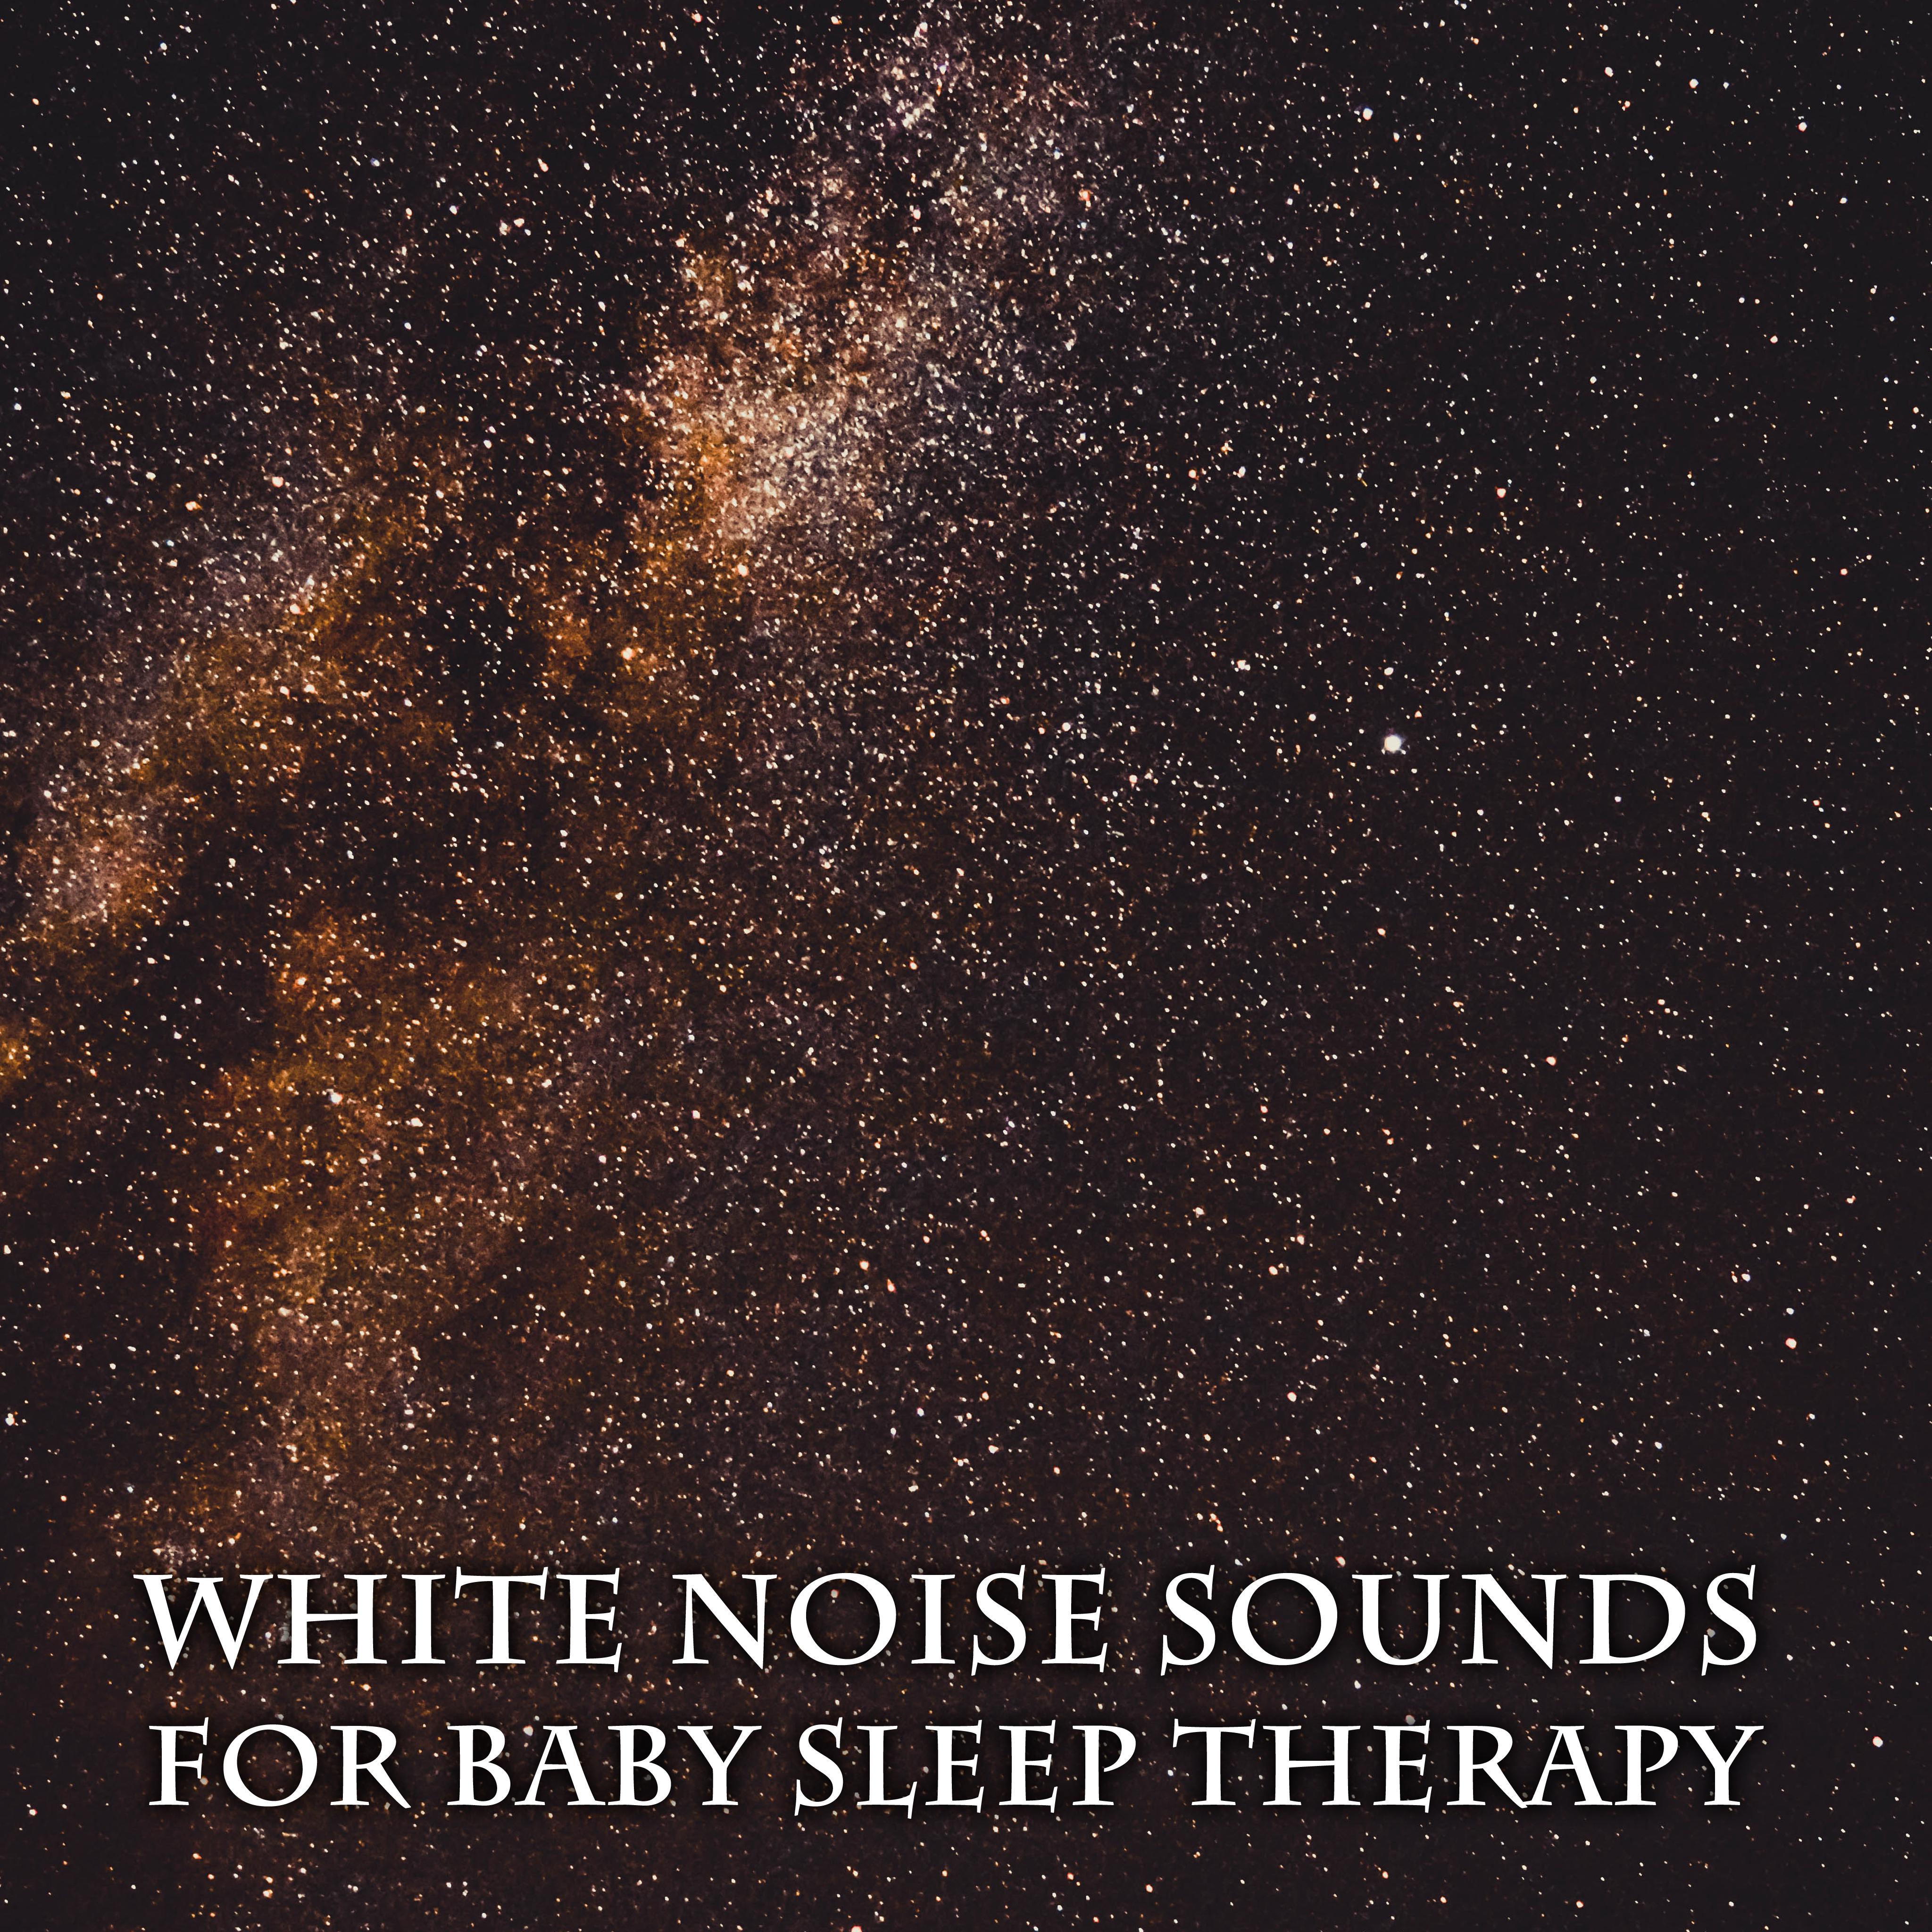 14 White Noise Sounds for Baby Sleep Therapy